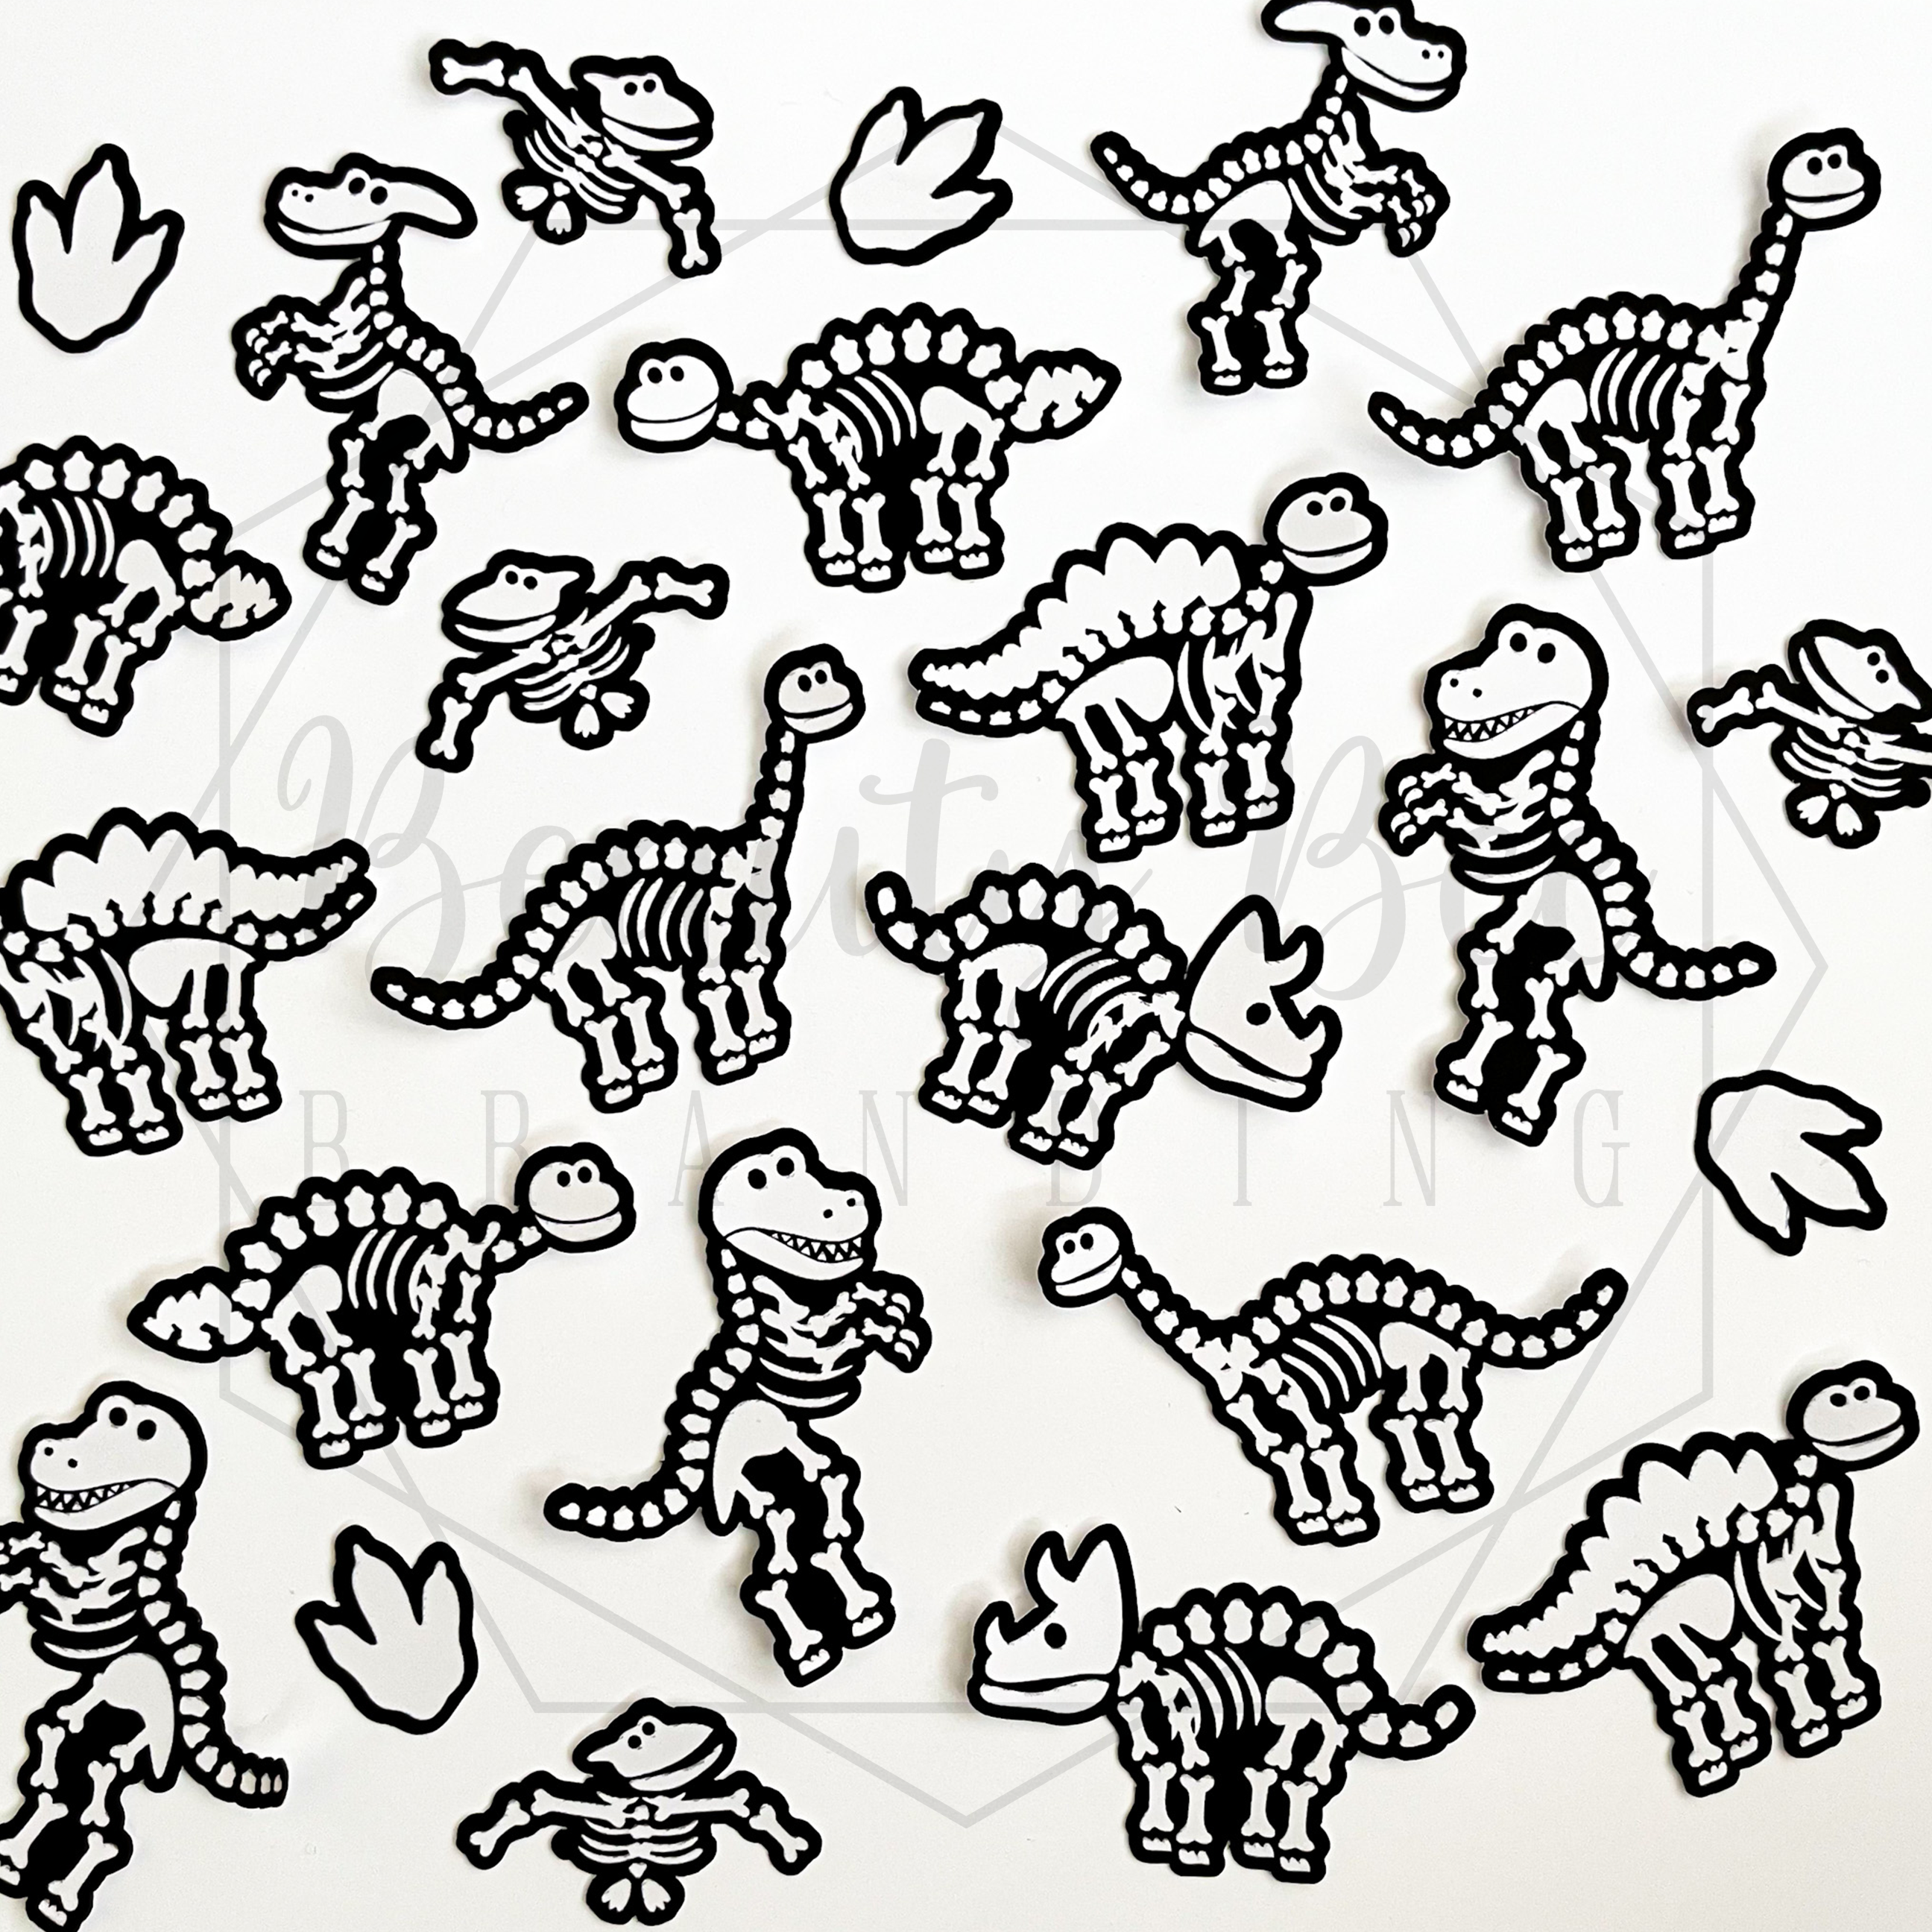 Monster Dinosaur Temporary Tattoo Transfers. Let's ROOOAR This Halloween at  Dino Party With Sugar Skull, Mummy, Zombie Dinos Body Stickers - Etsy